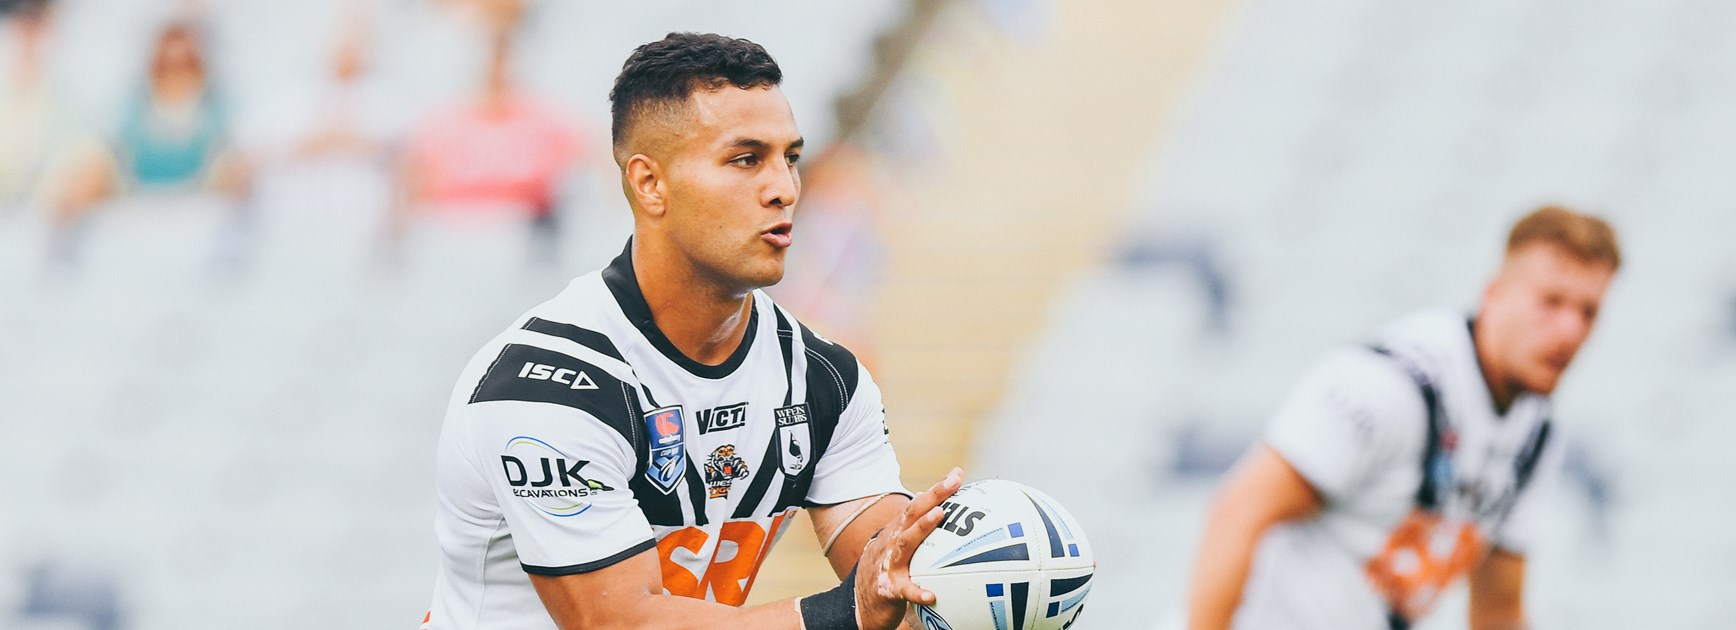 Wests Tigers Results: Round 12